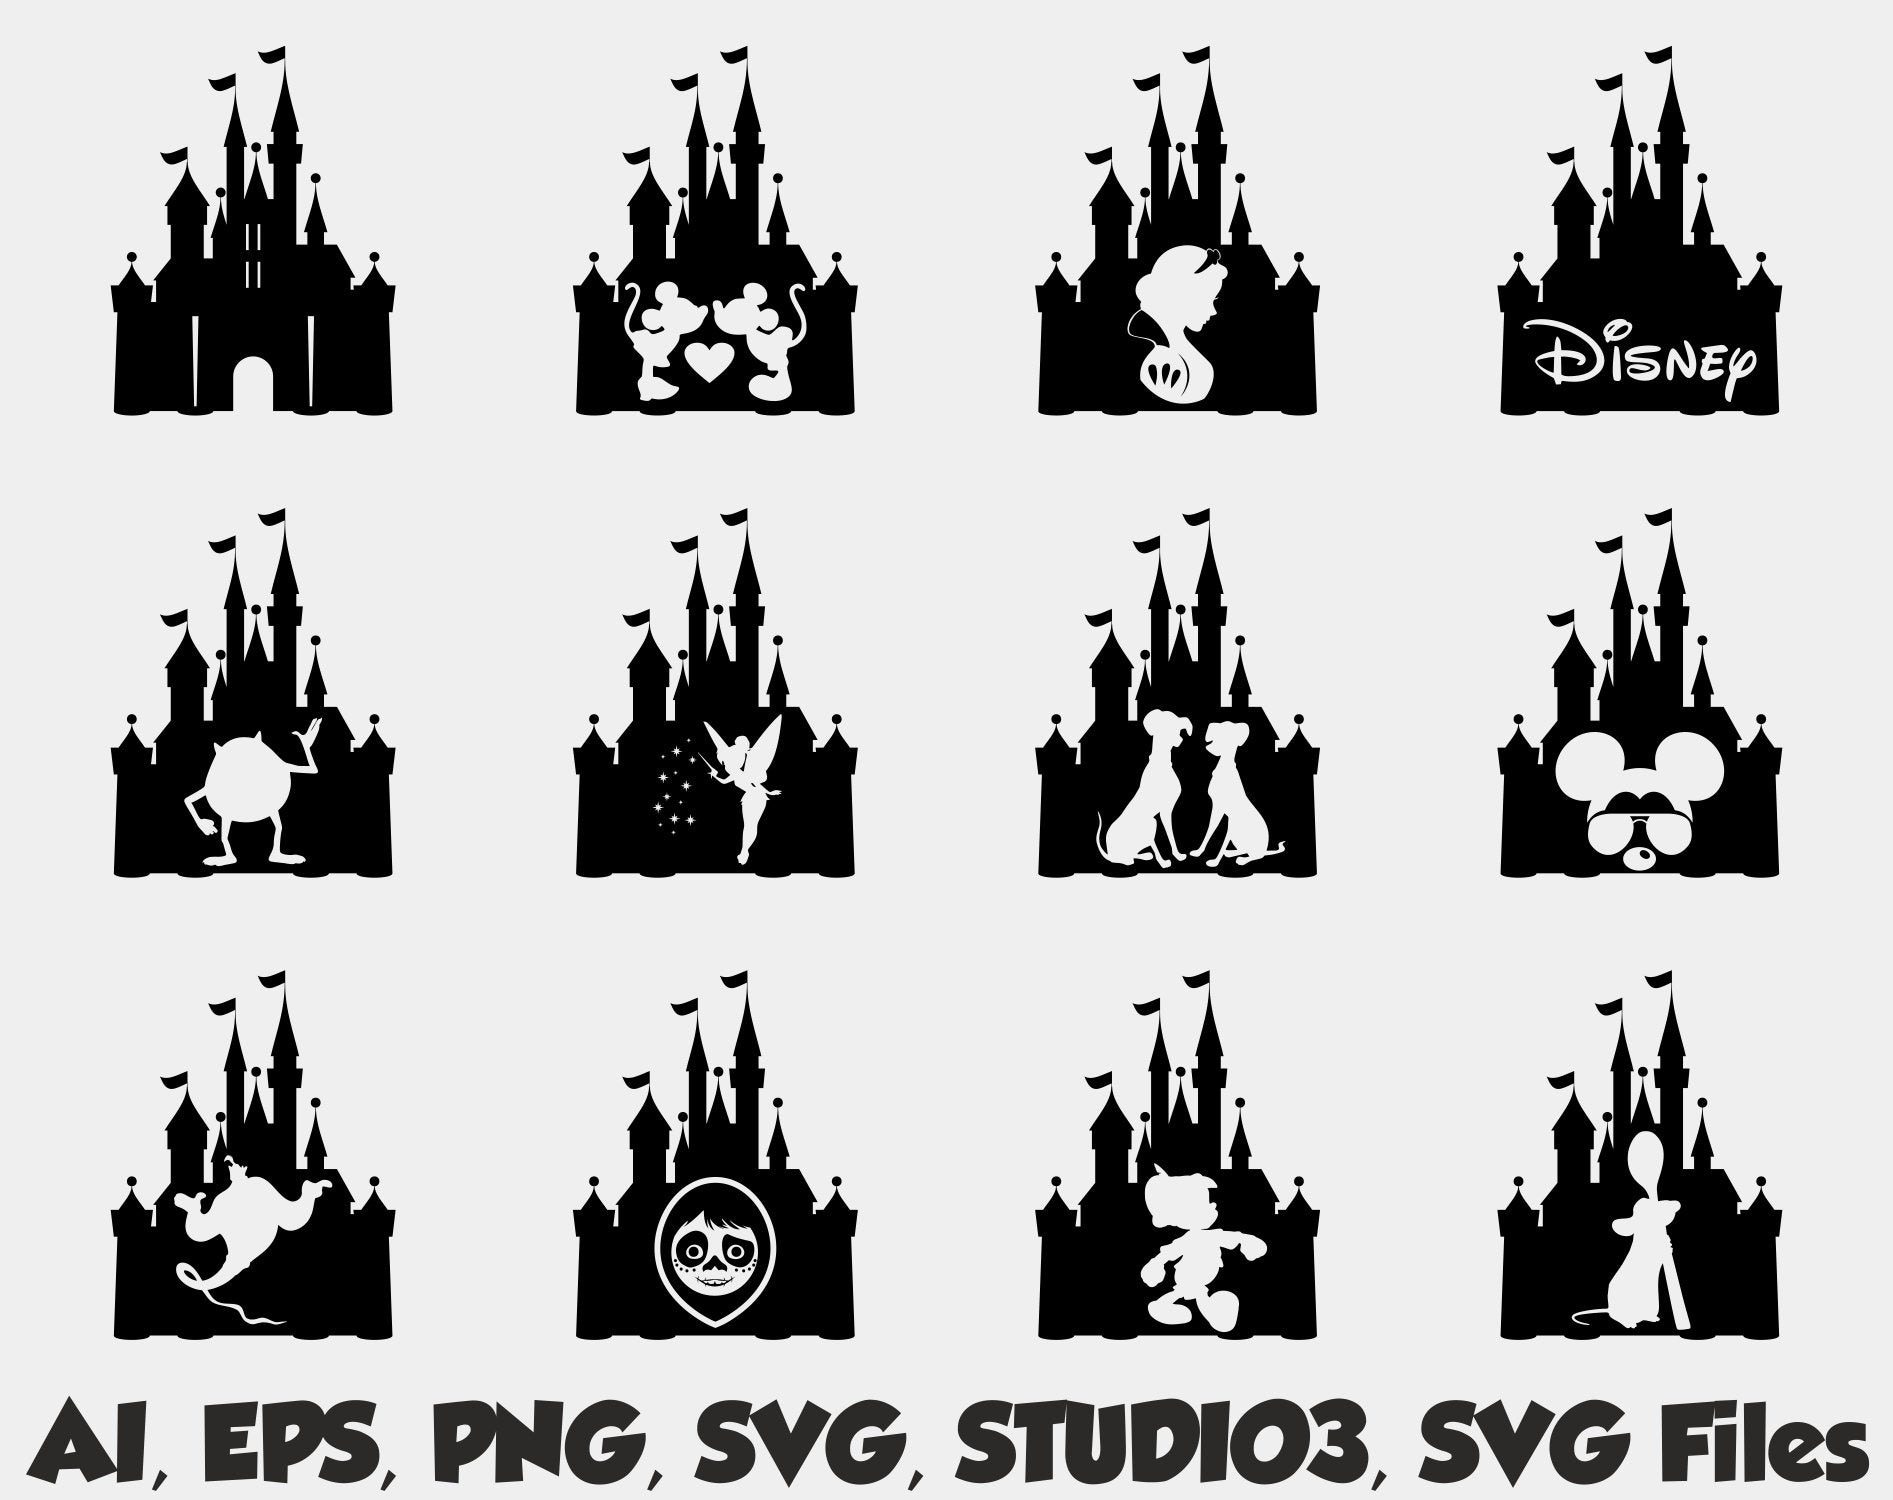 Cinderella Castle Silhouette Vector at Vectorified.com | Collection of